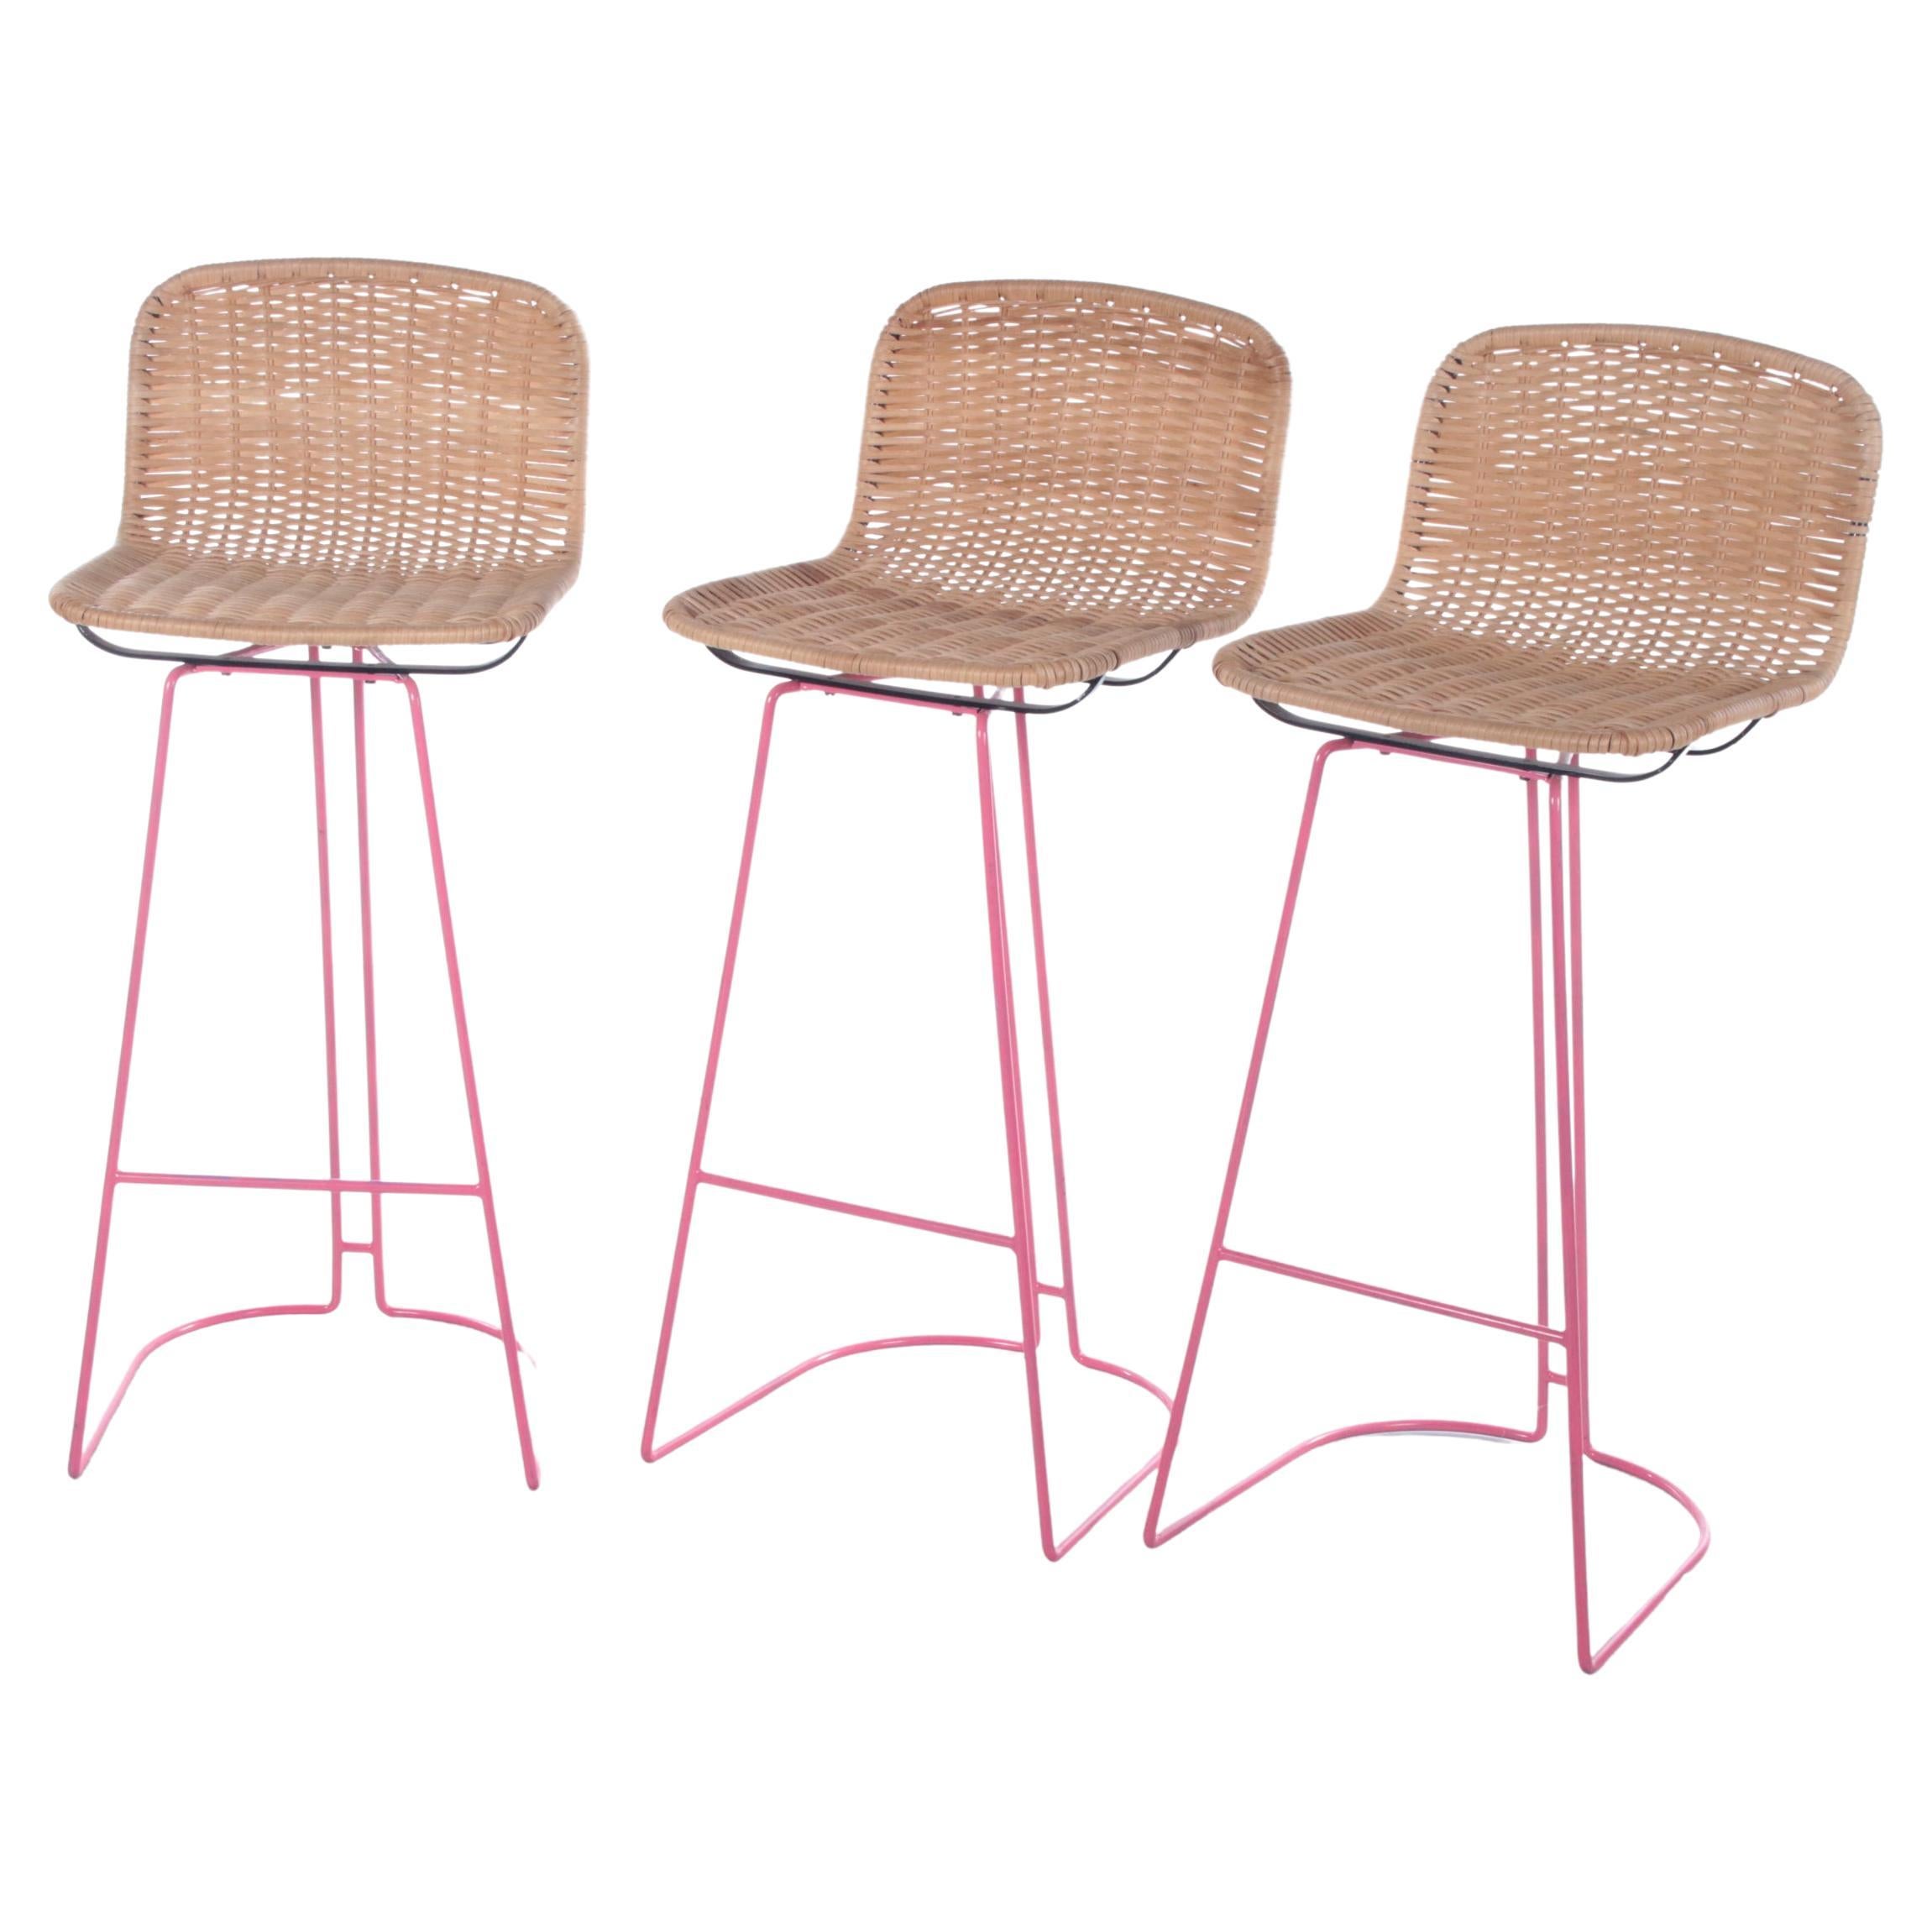 Italian Set of 3 Bar Stools with Cane and Metal by Cidue, 1980s